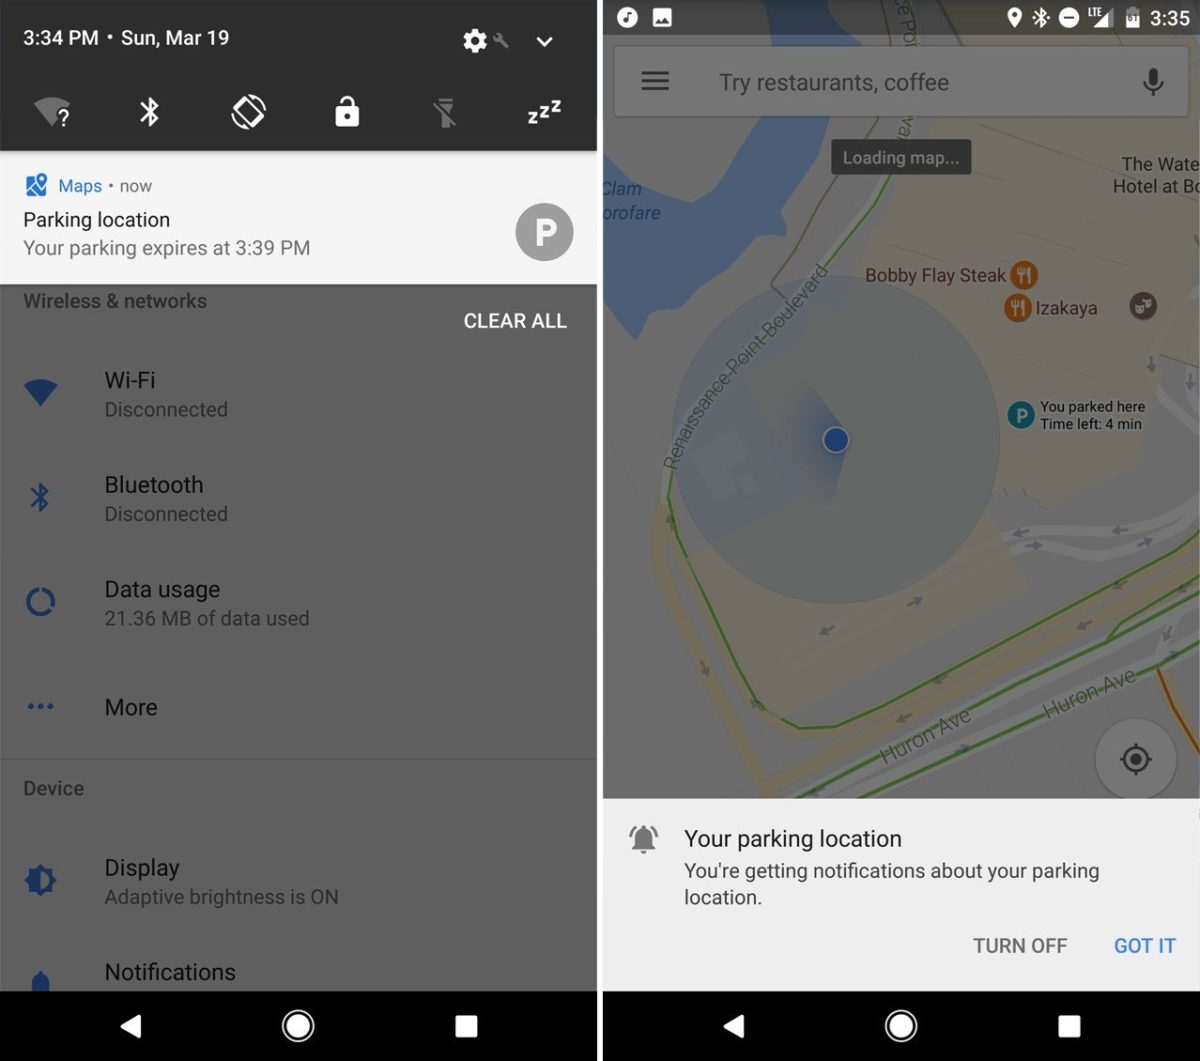 Google Maps For Android - Parking Feature